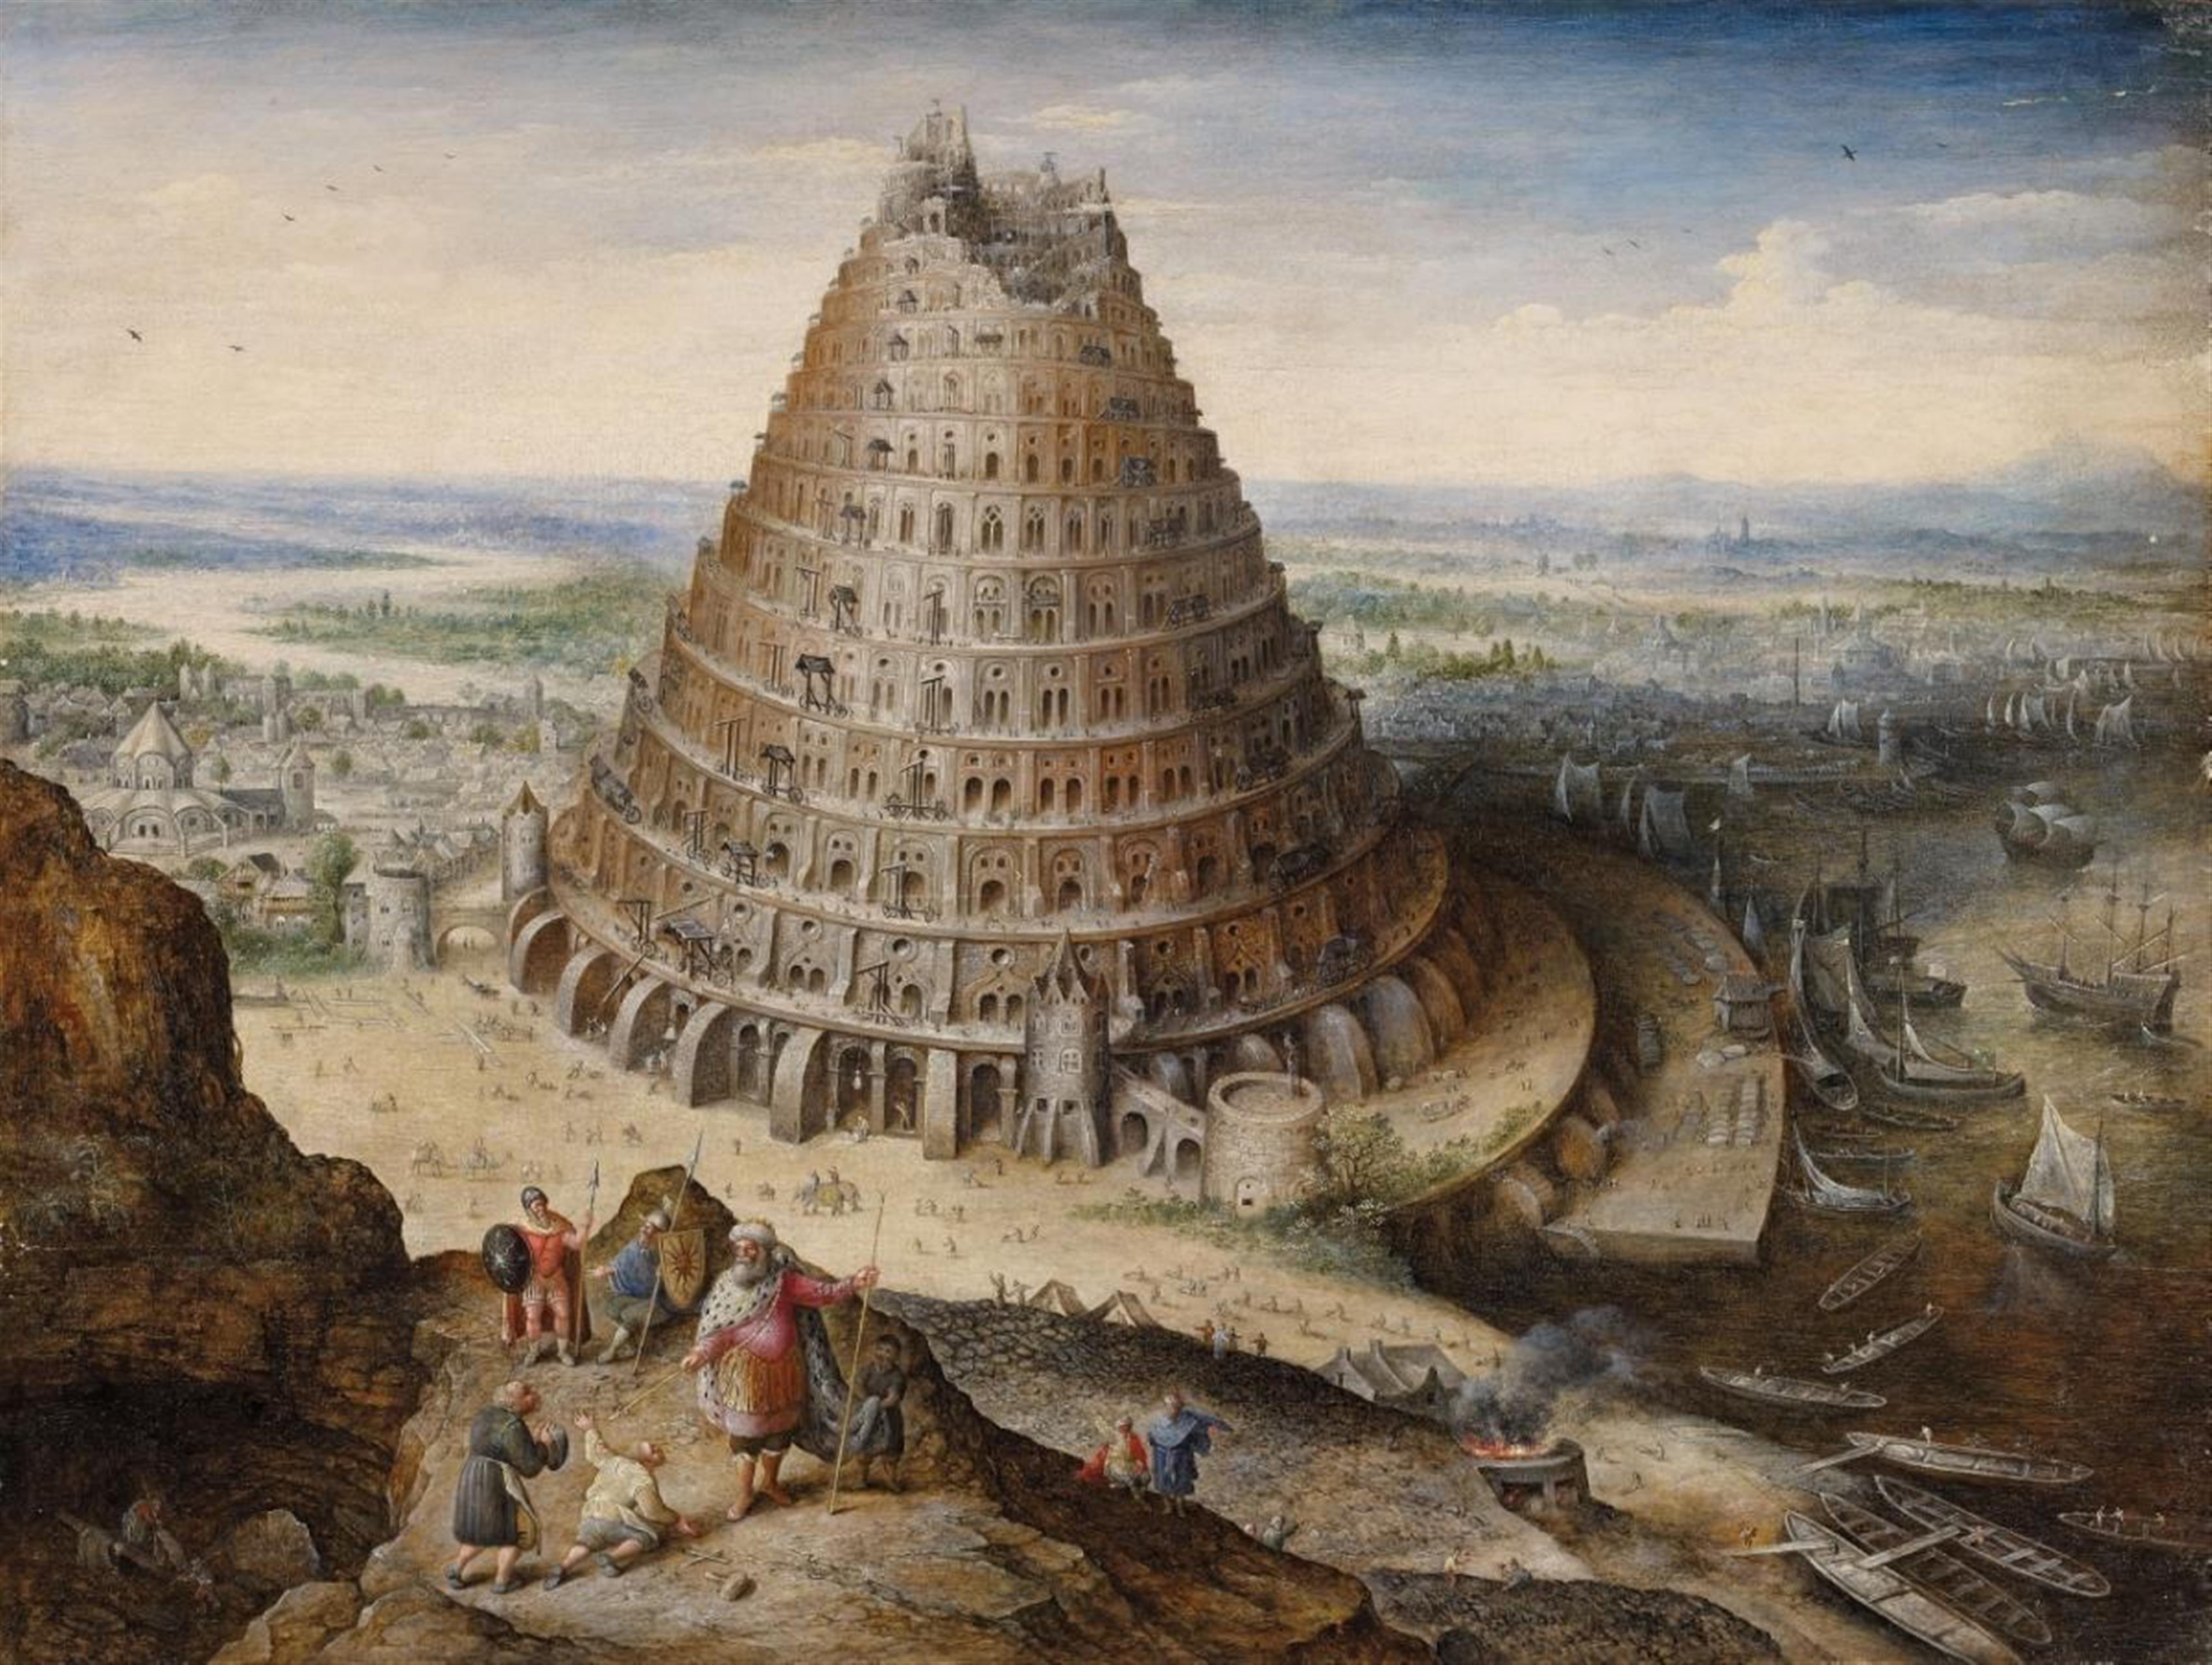 Lucas van Valckenborch - THE TOWER OF BABEL - image-1